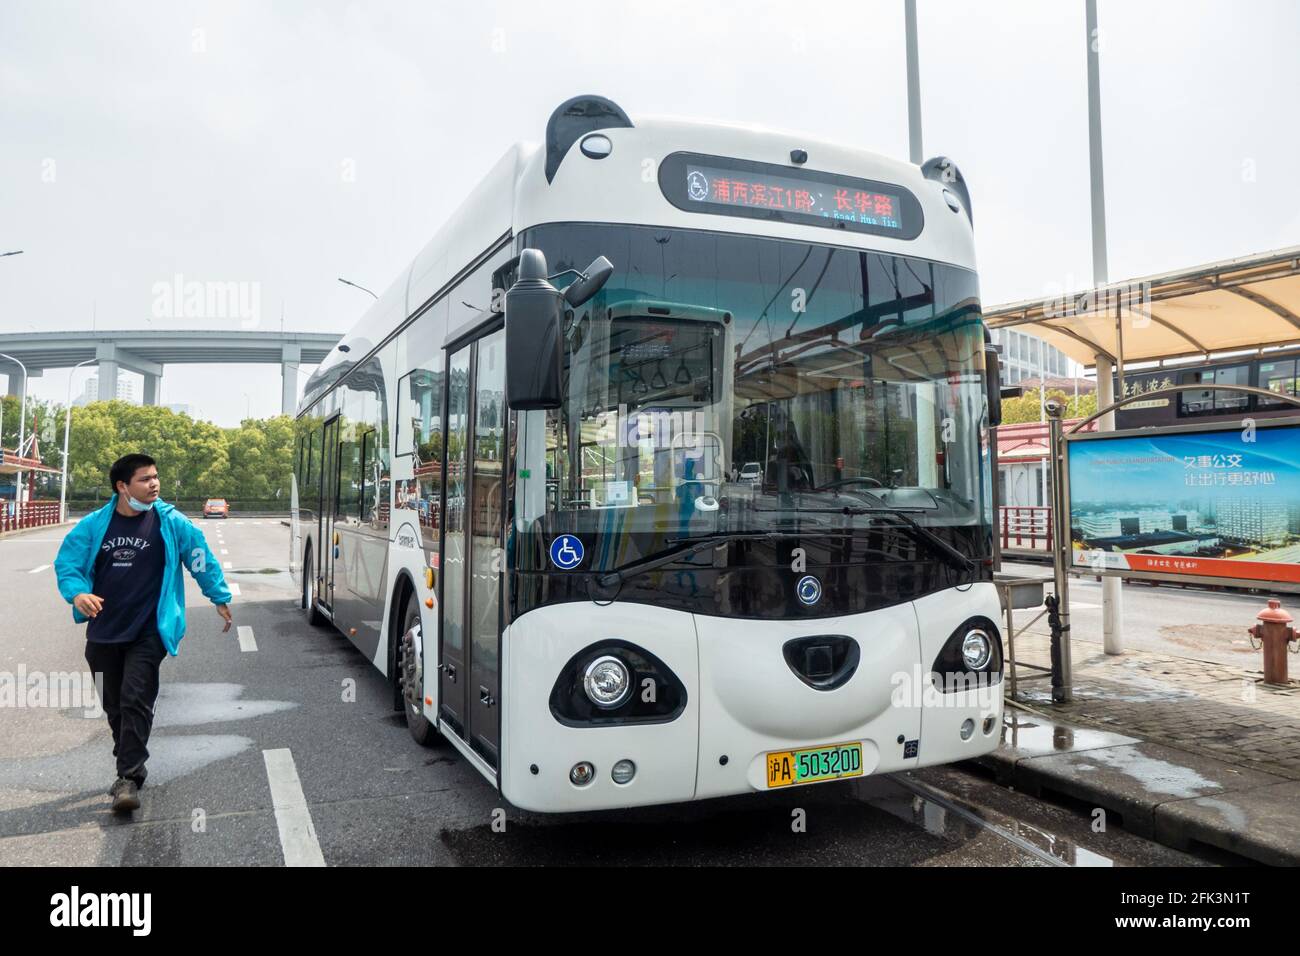 Shanghai, Shanghai, China. 28th Apr, 2021. On April 28, 2021, in Shanghai, at a bus station near the Nanpu Bridge, a staff member is cleaning a cute panda car. On April 27, 4 super cute panda buses were put into operation on Binjiang 1 Road in Puxi, adding a moving landscape along the riverside. The two ''big eyes'' on the front of the panda car not only come with dark circles, but there are actually two round black ''small ears'' on the roof. From a distance, it is a cute cartoon panda. It is reported that the panda bus is a new type of pure electric barrier-free bus. The barrier-free pe Stock Photo